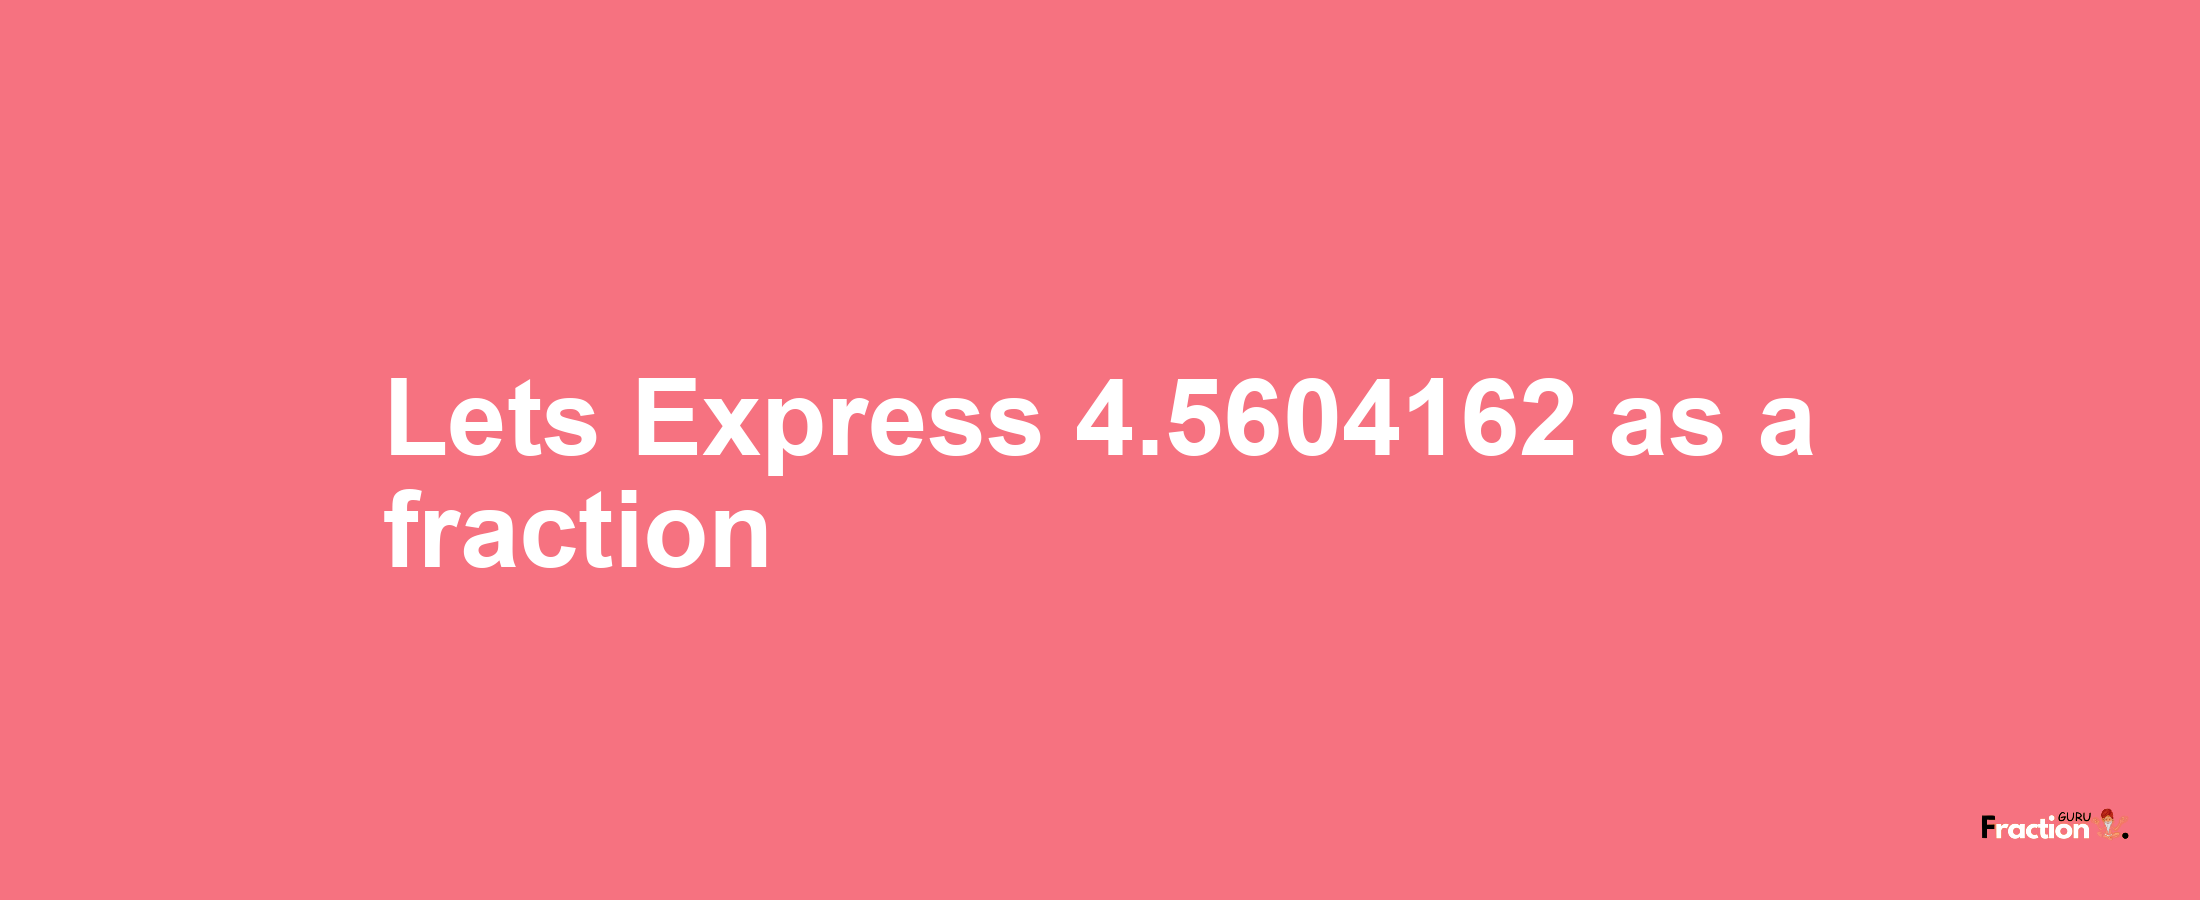 Lets Express 4.5604162 as afraction